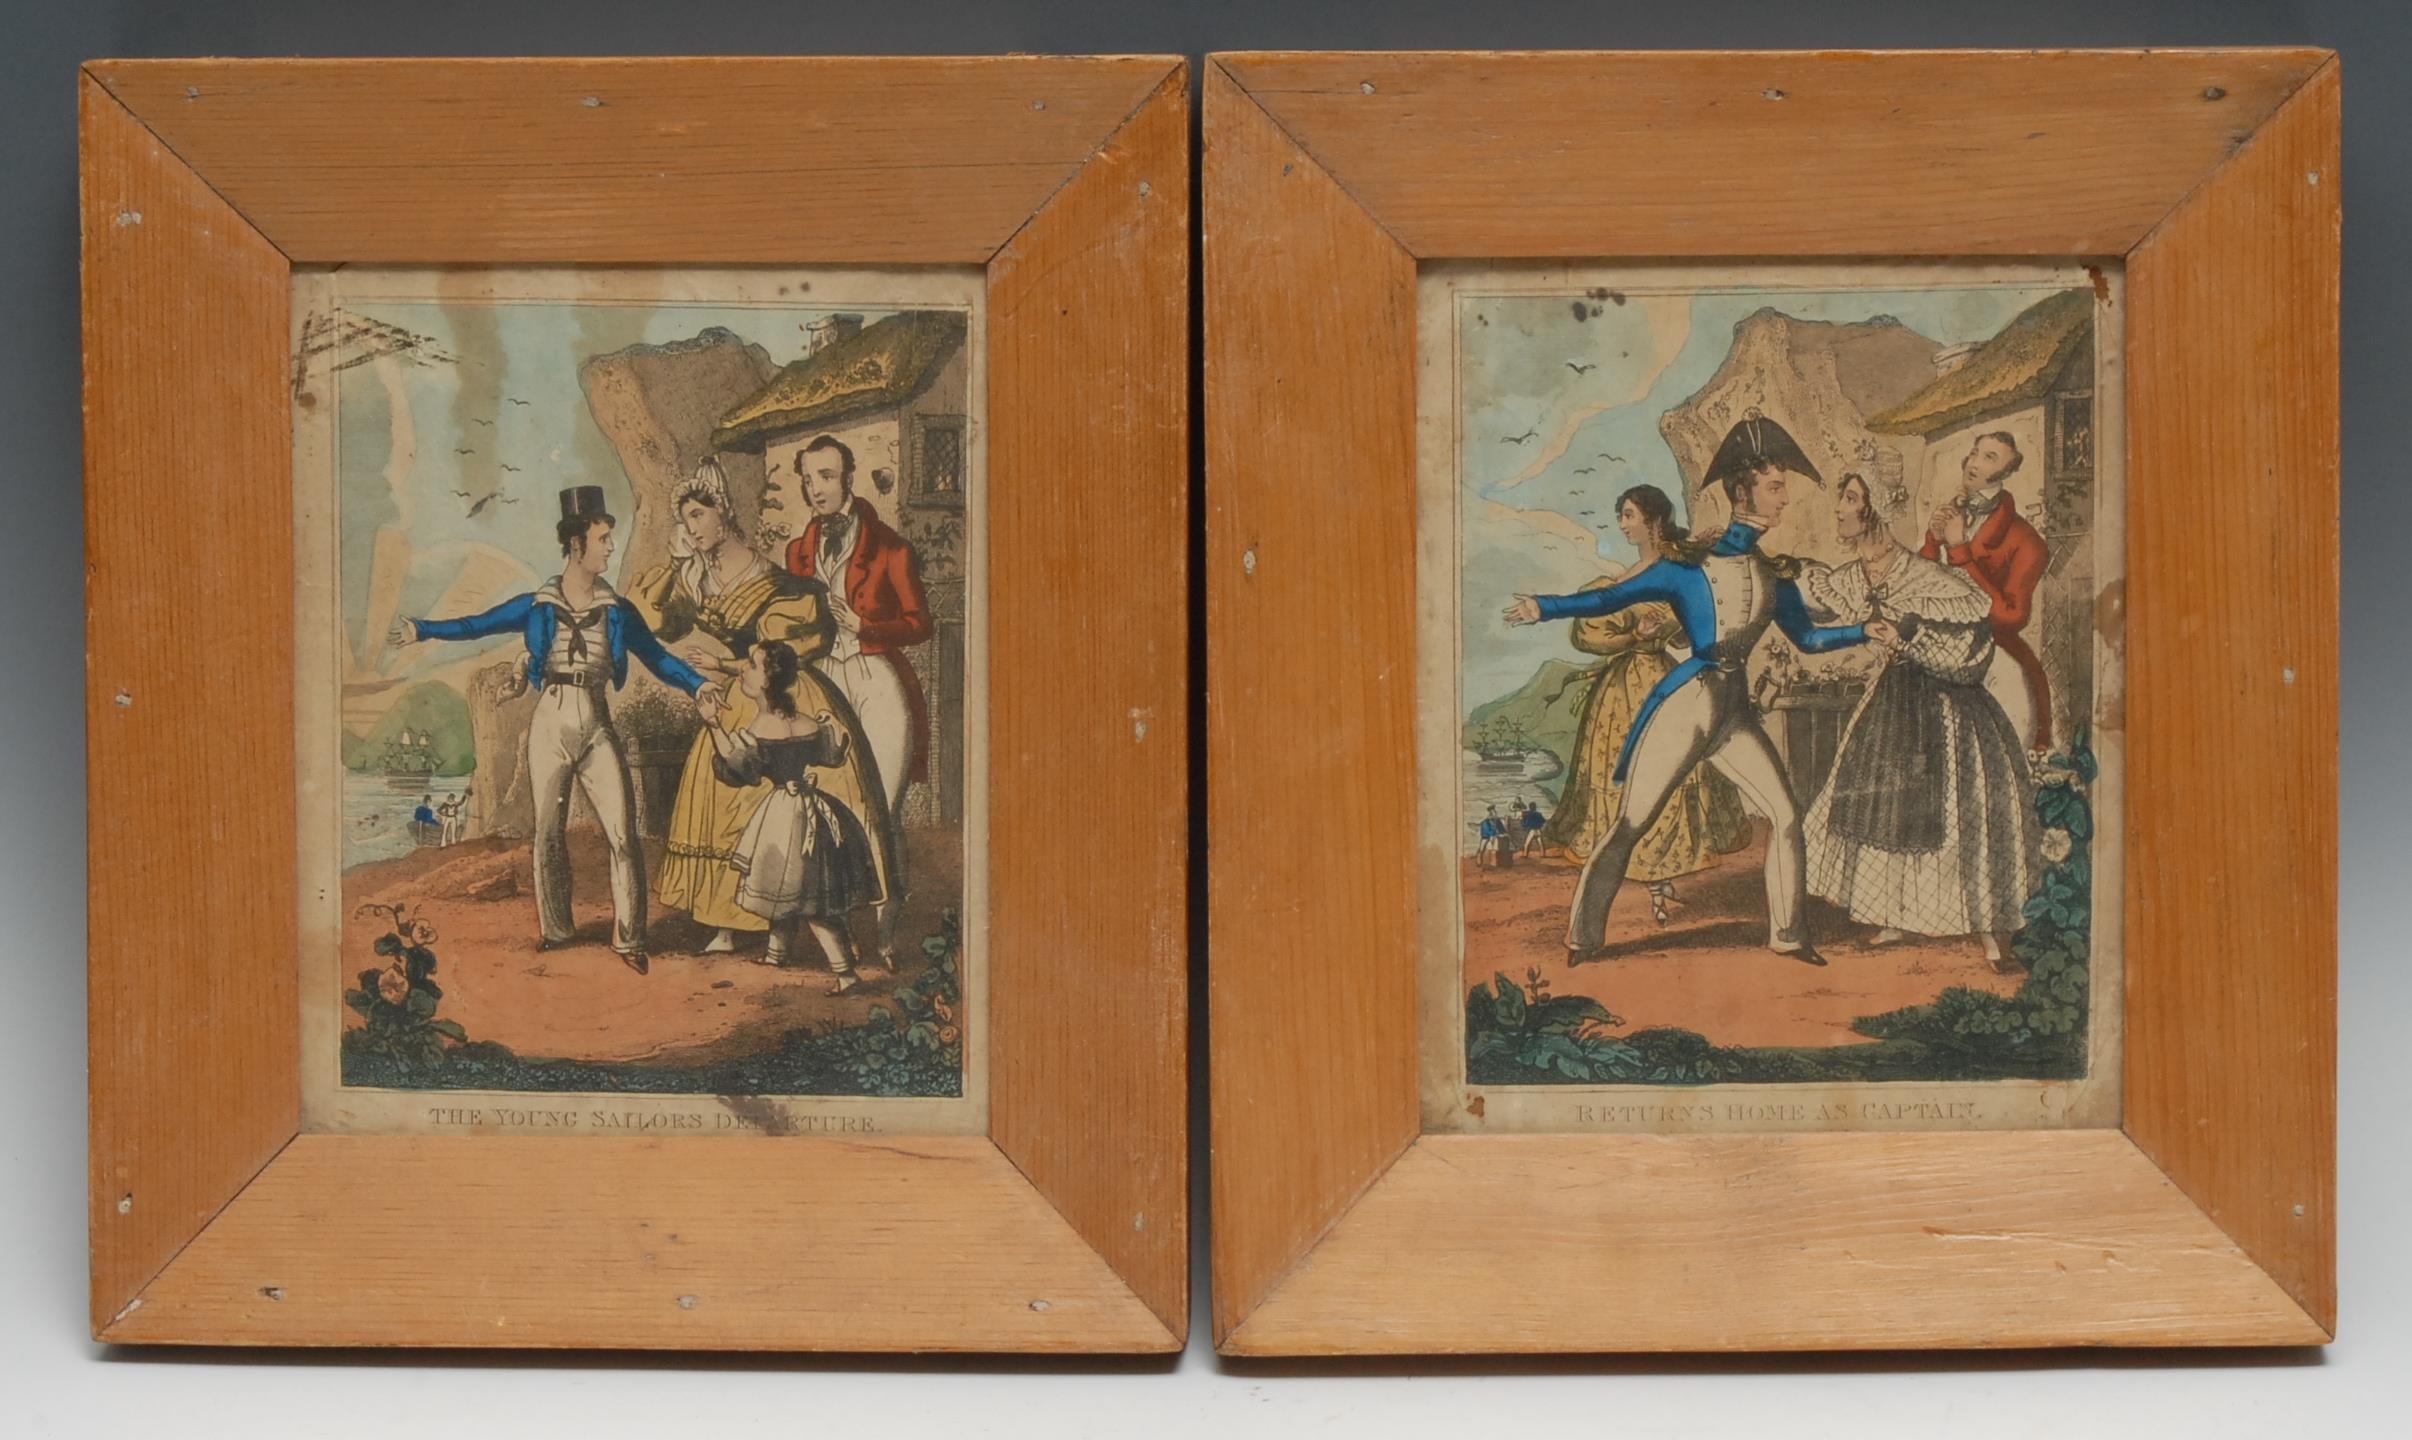 Interior Decoration - a pair of 19th century furnishing prints, The Young Sailor's Departure and